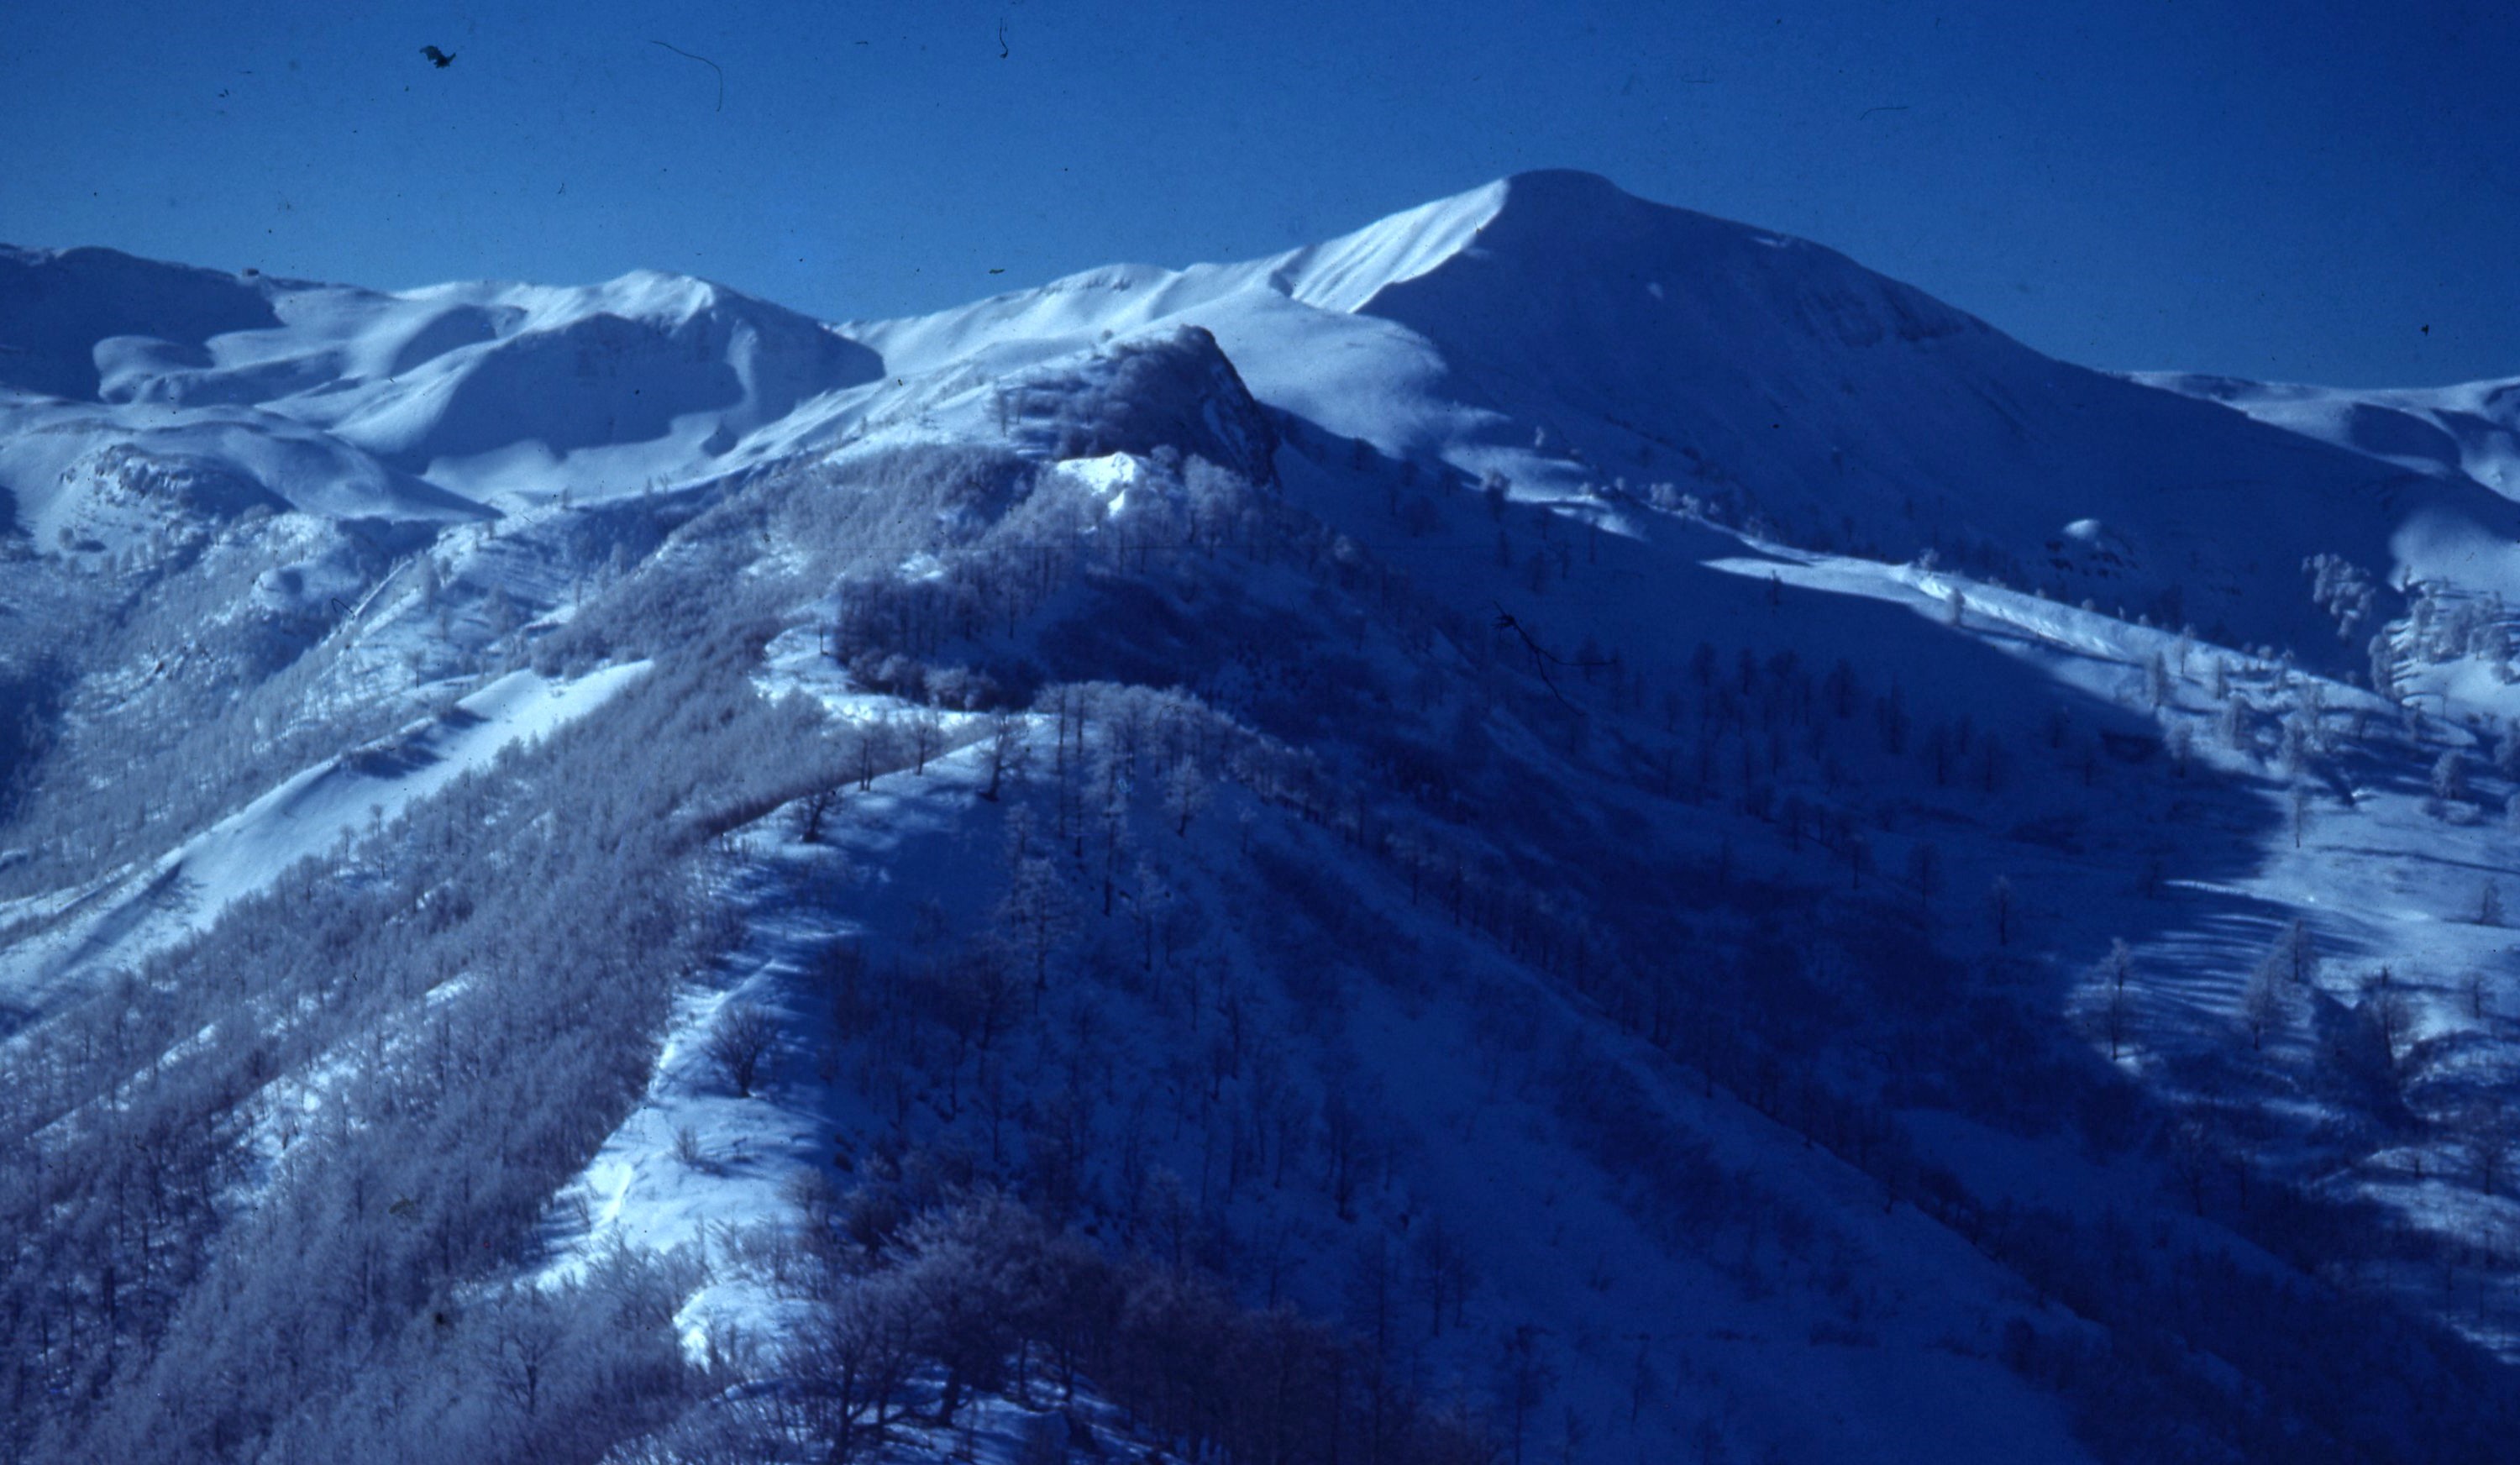 Riva Ridge, as photographed by a 10th Mountain Division soldier